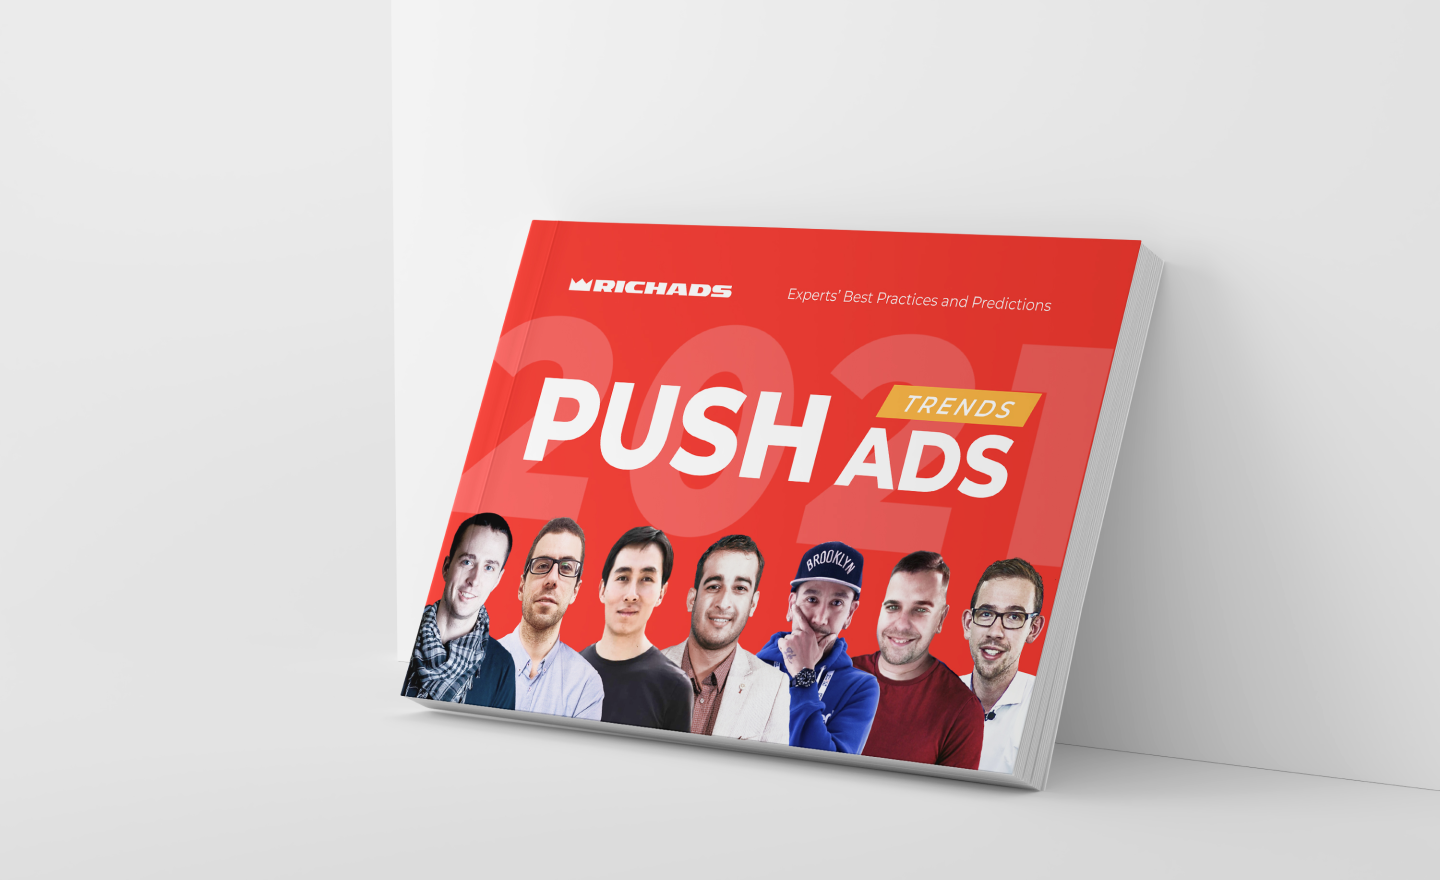 Guide on push ads